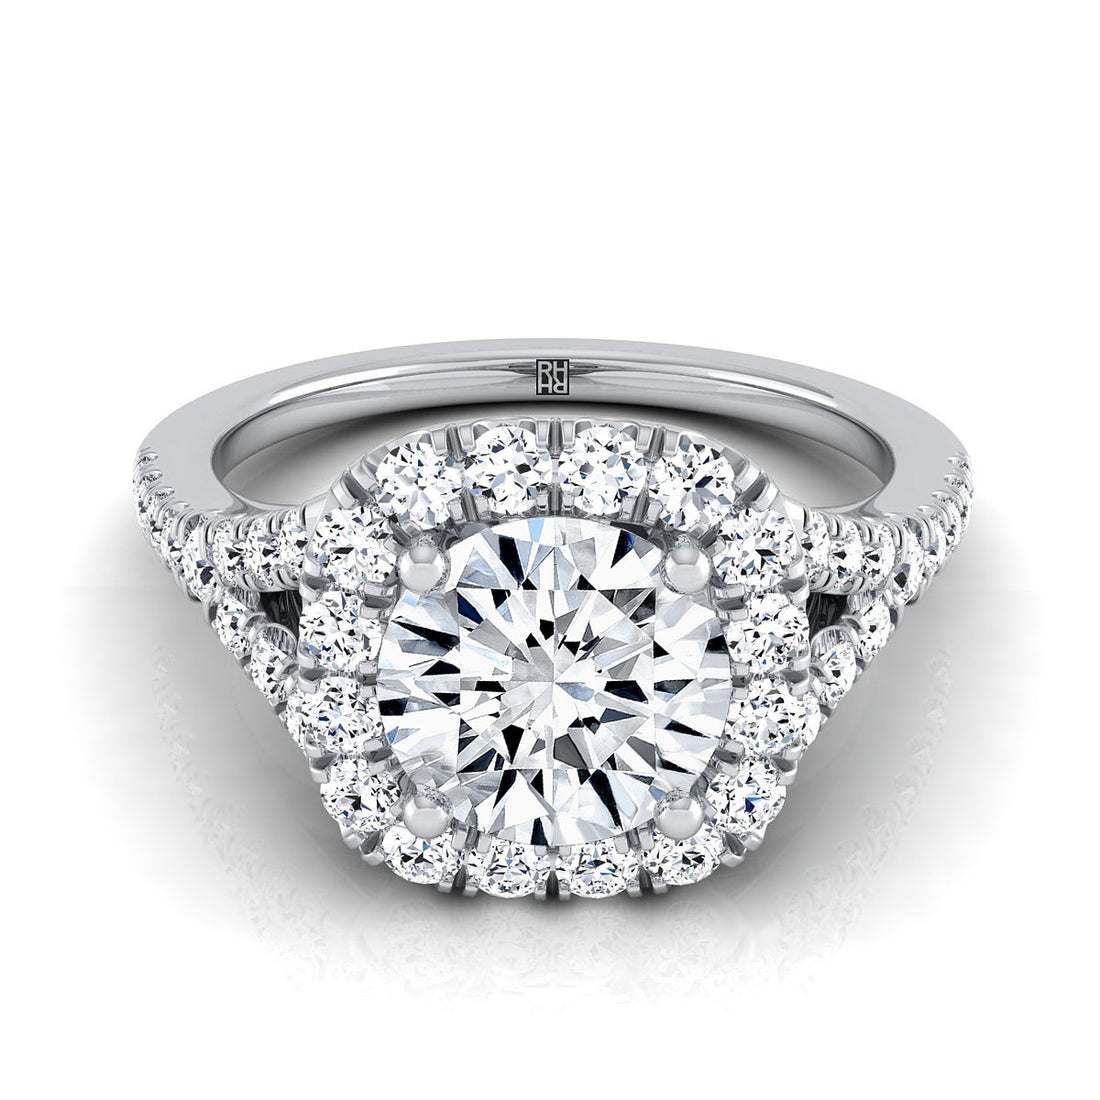 Incredible Designs for Diamond Rings with Halos